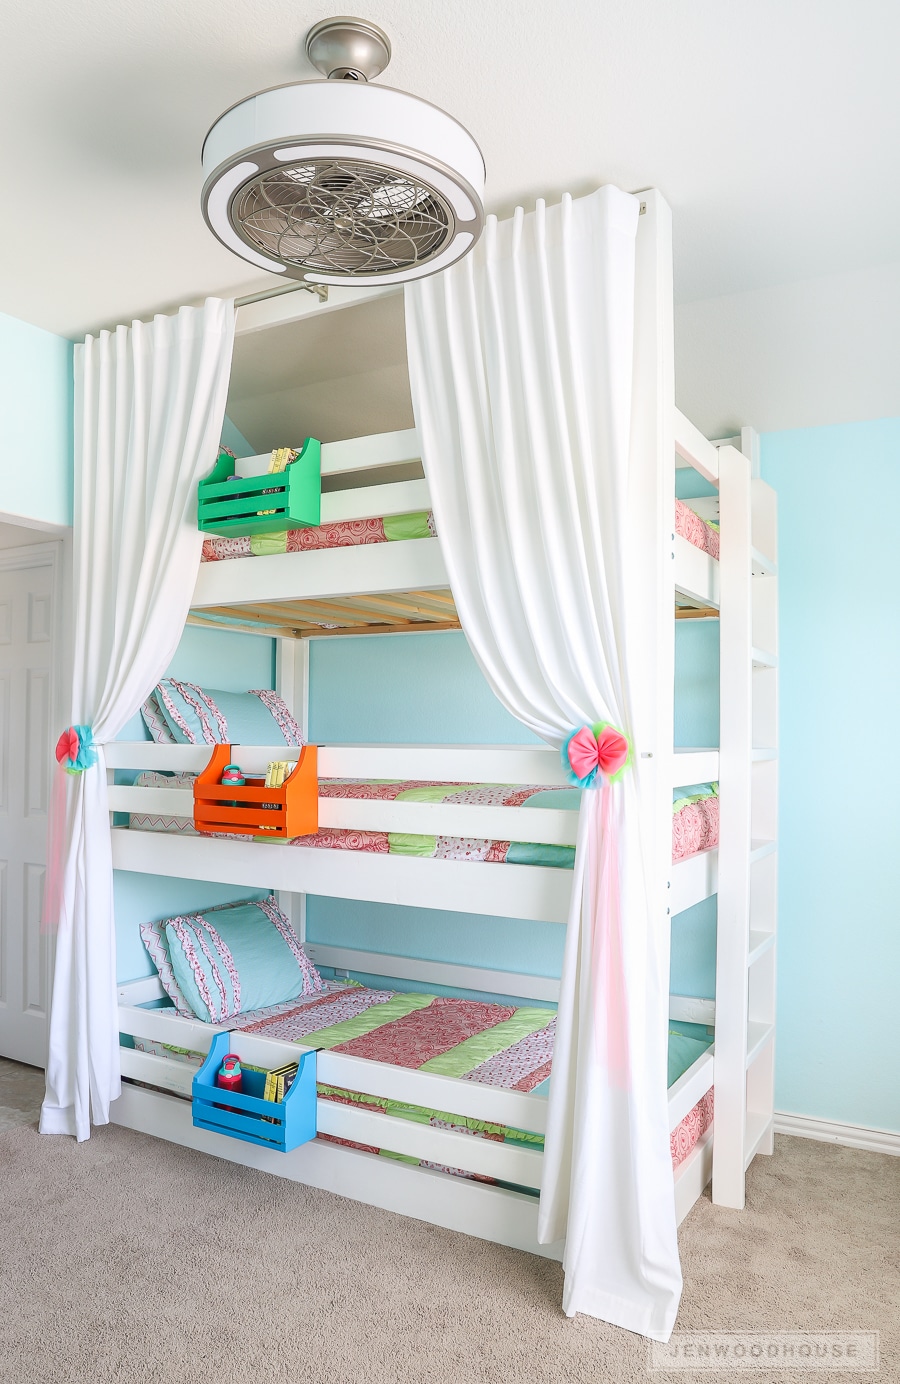 How To Build A Diy Triple Bunk Bed, Rv Bunk Beds Ladder Diy Plans